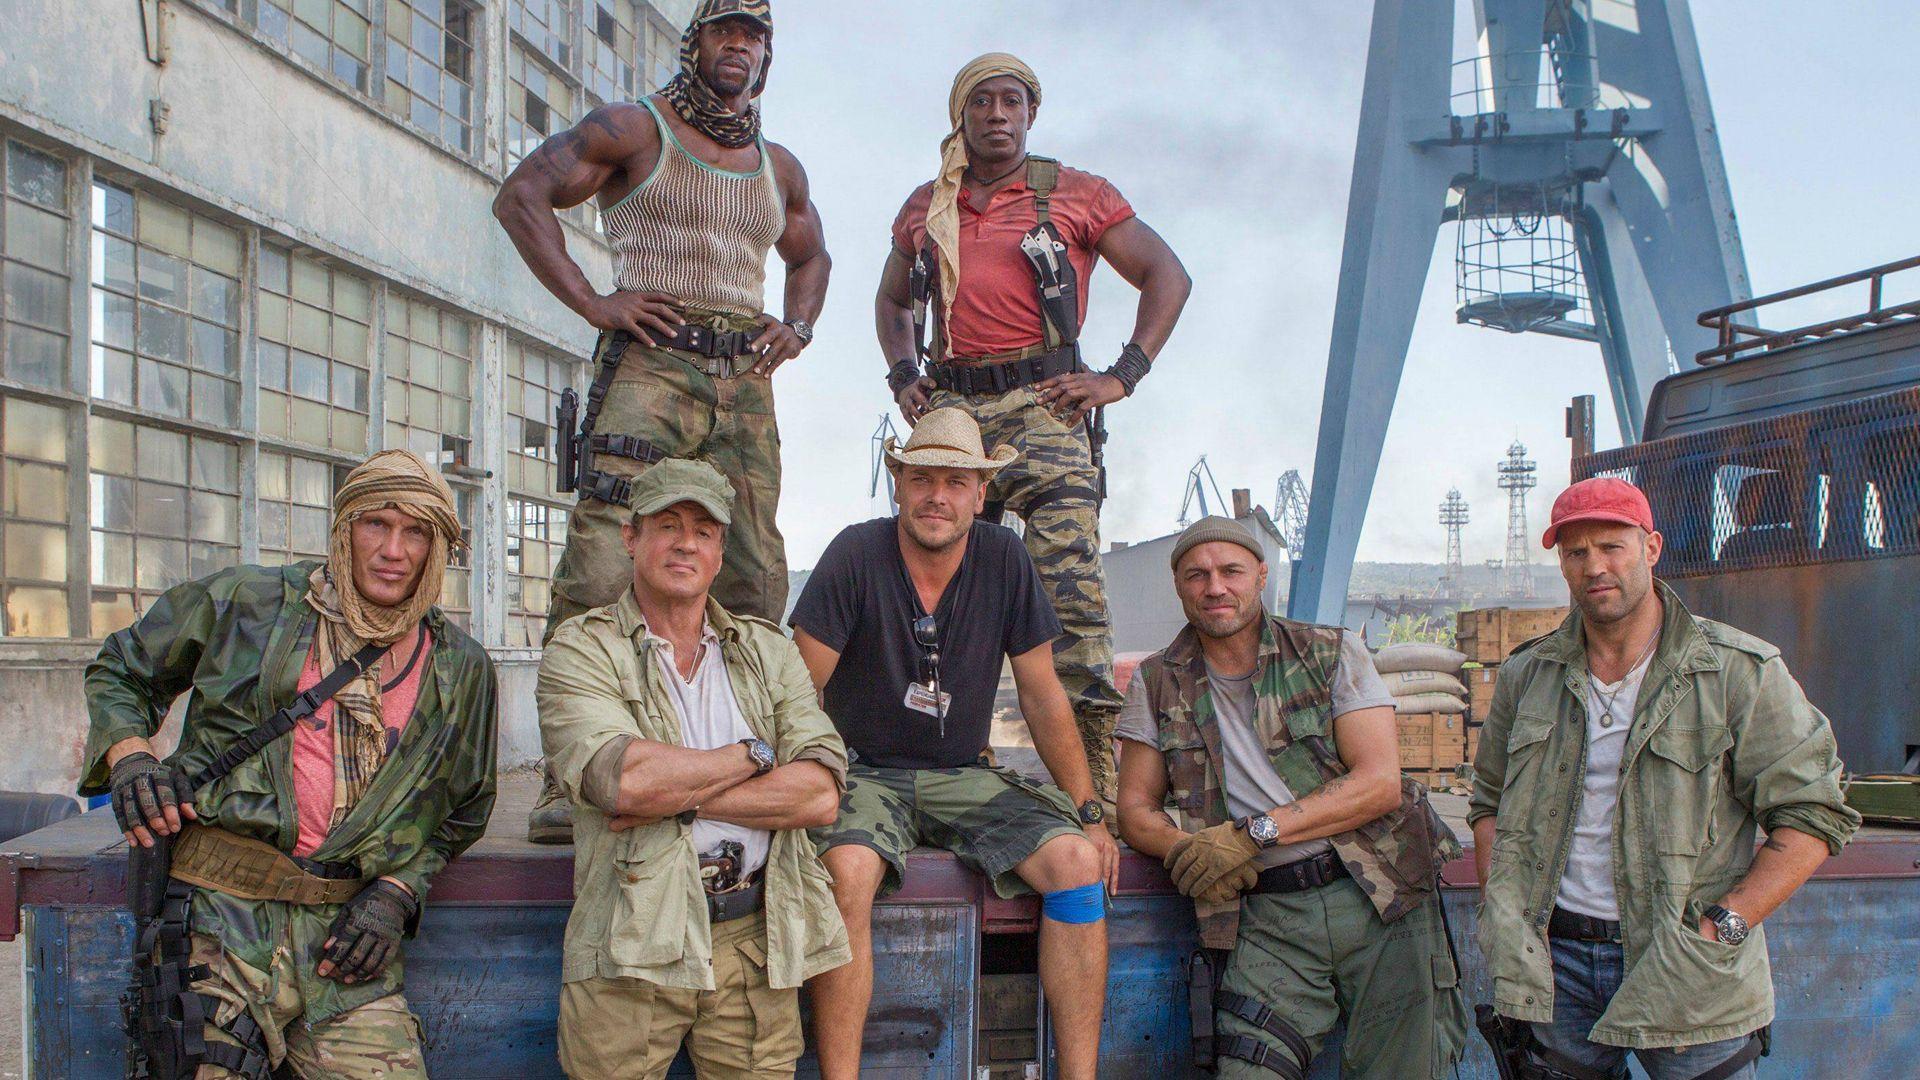 In Gallery: The Expendables 3 Wallpaper, 42 The Expendables 3 HD